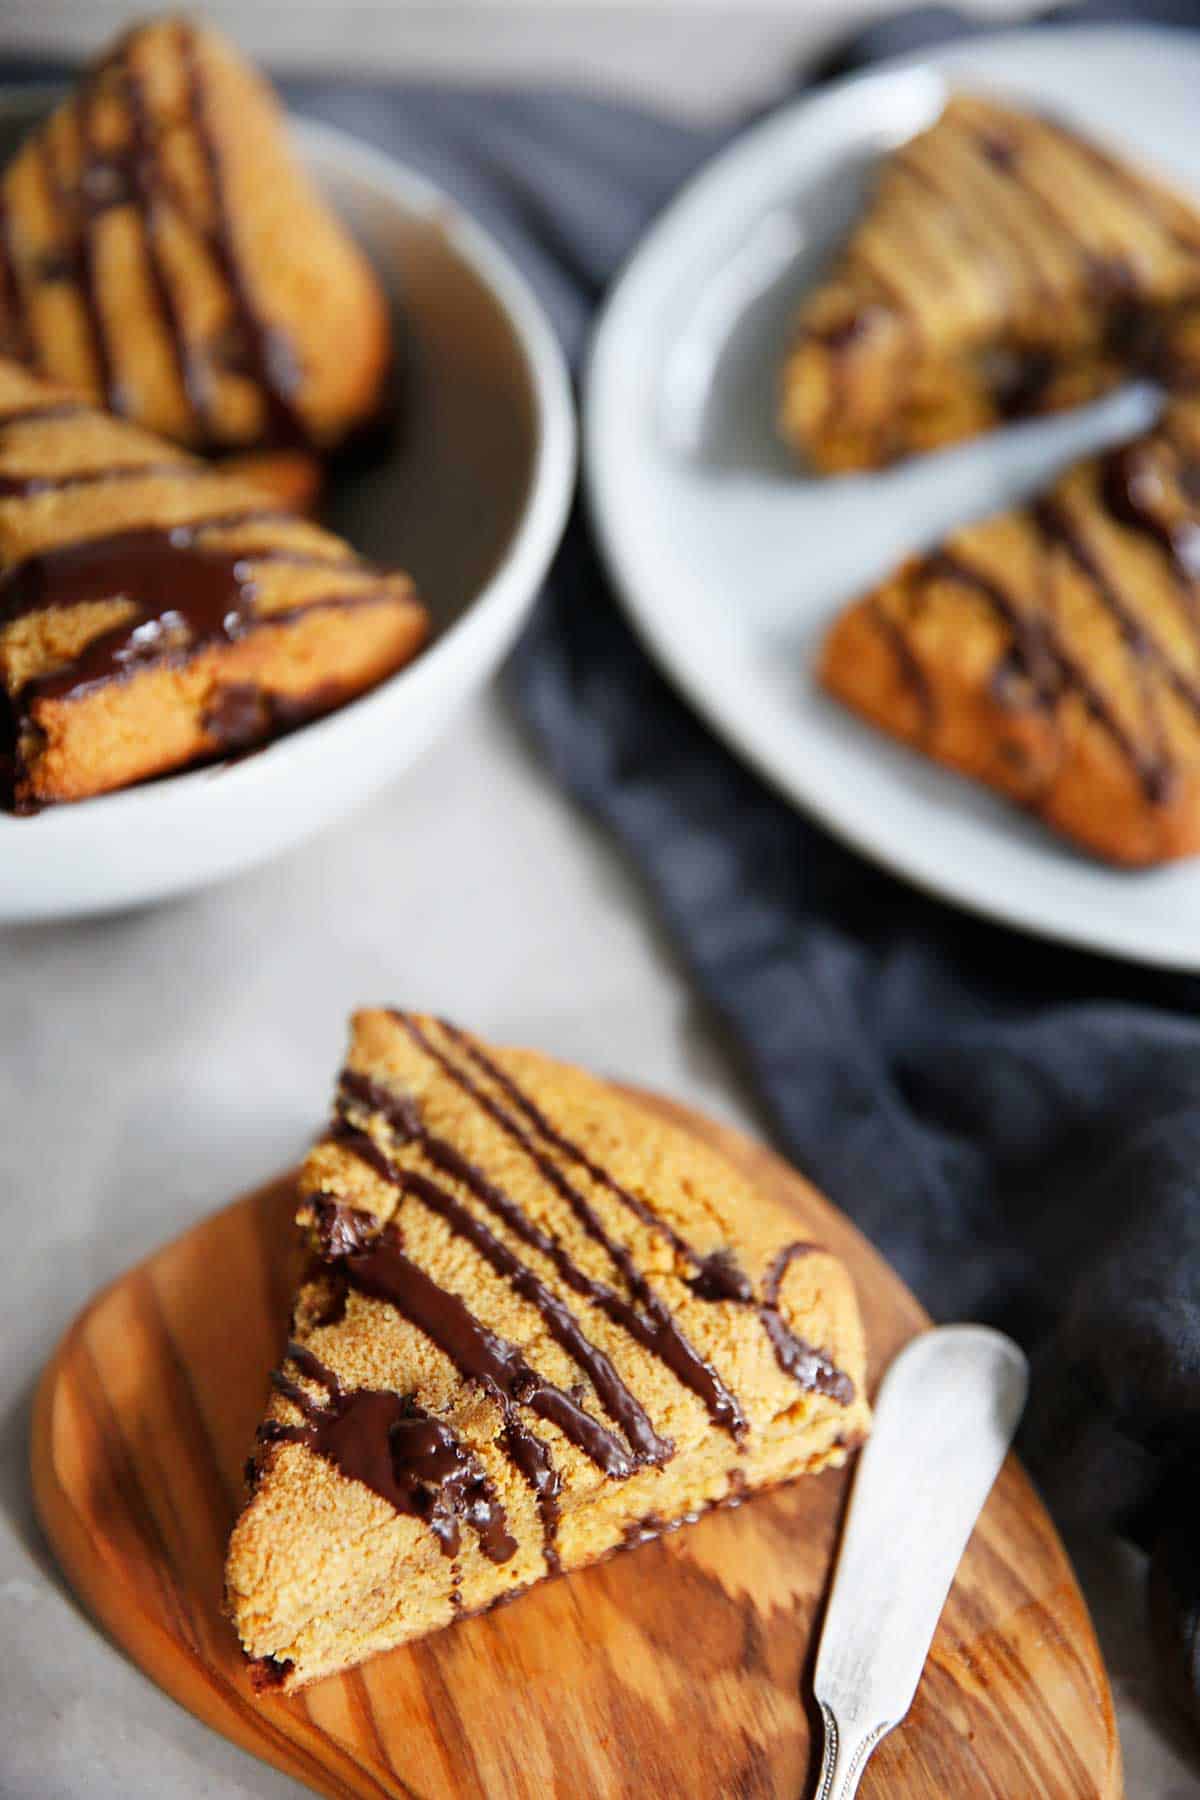 A gluten-free pumpkin scone with drizzled chocolate on it!